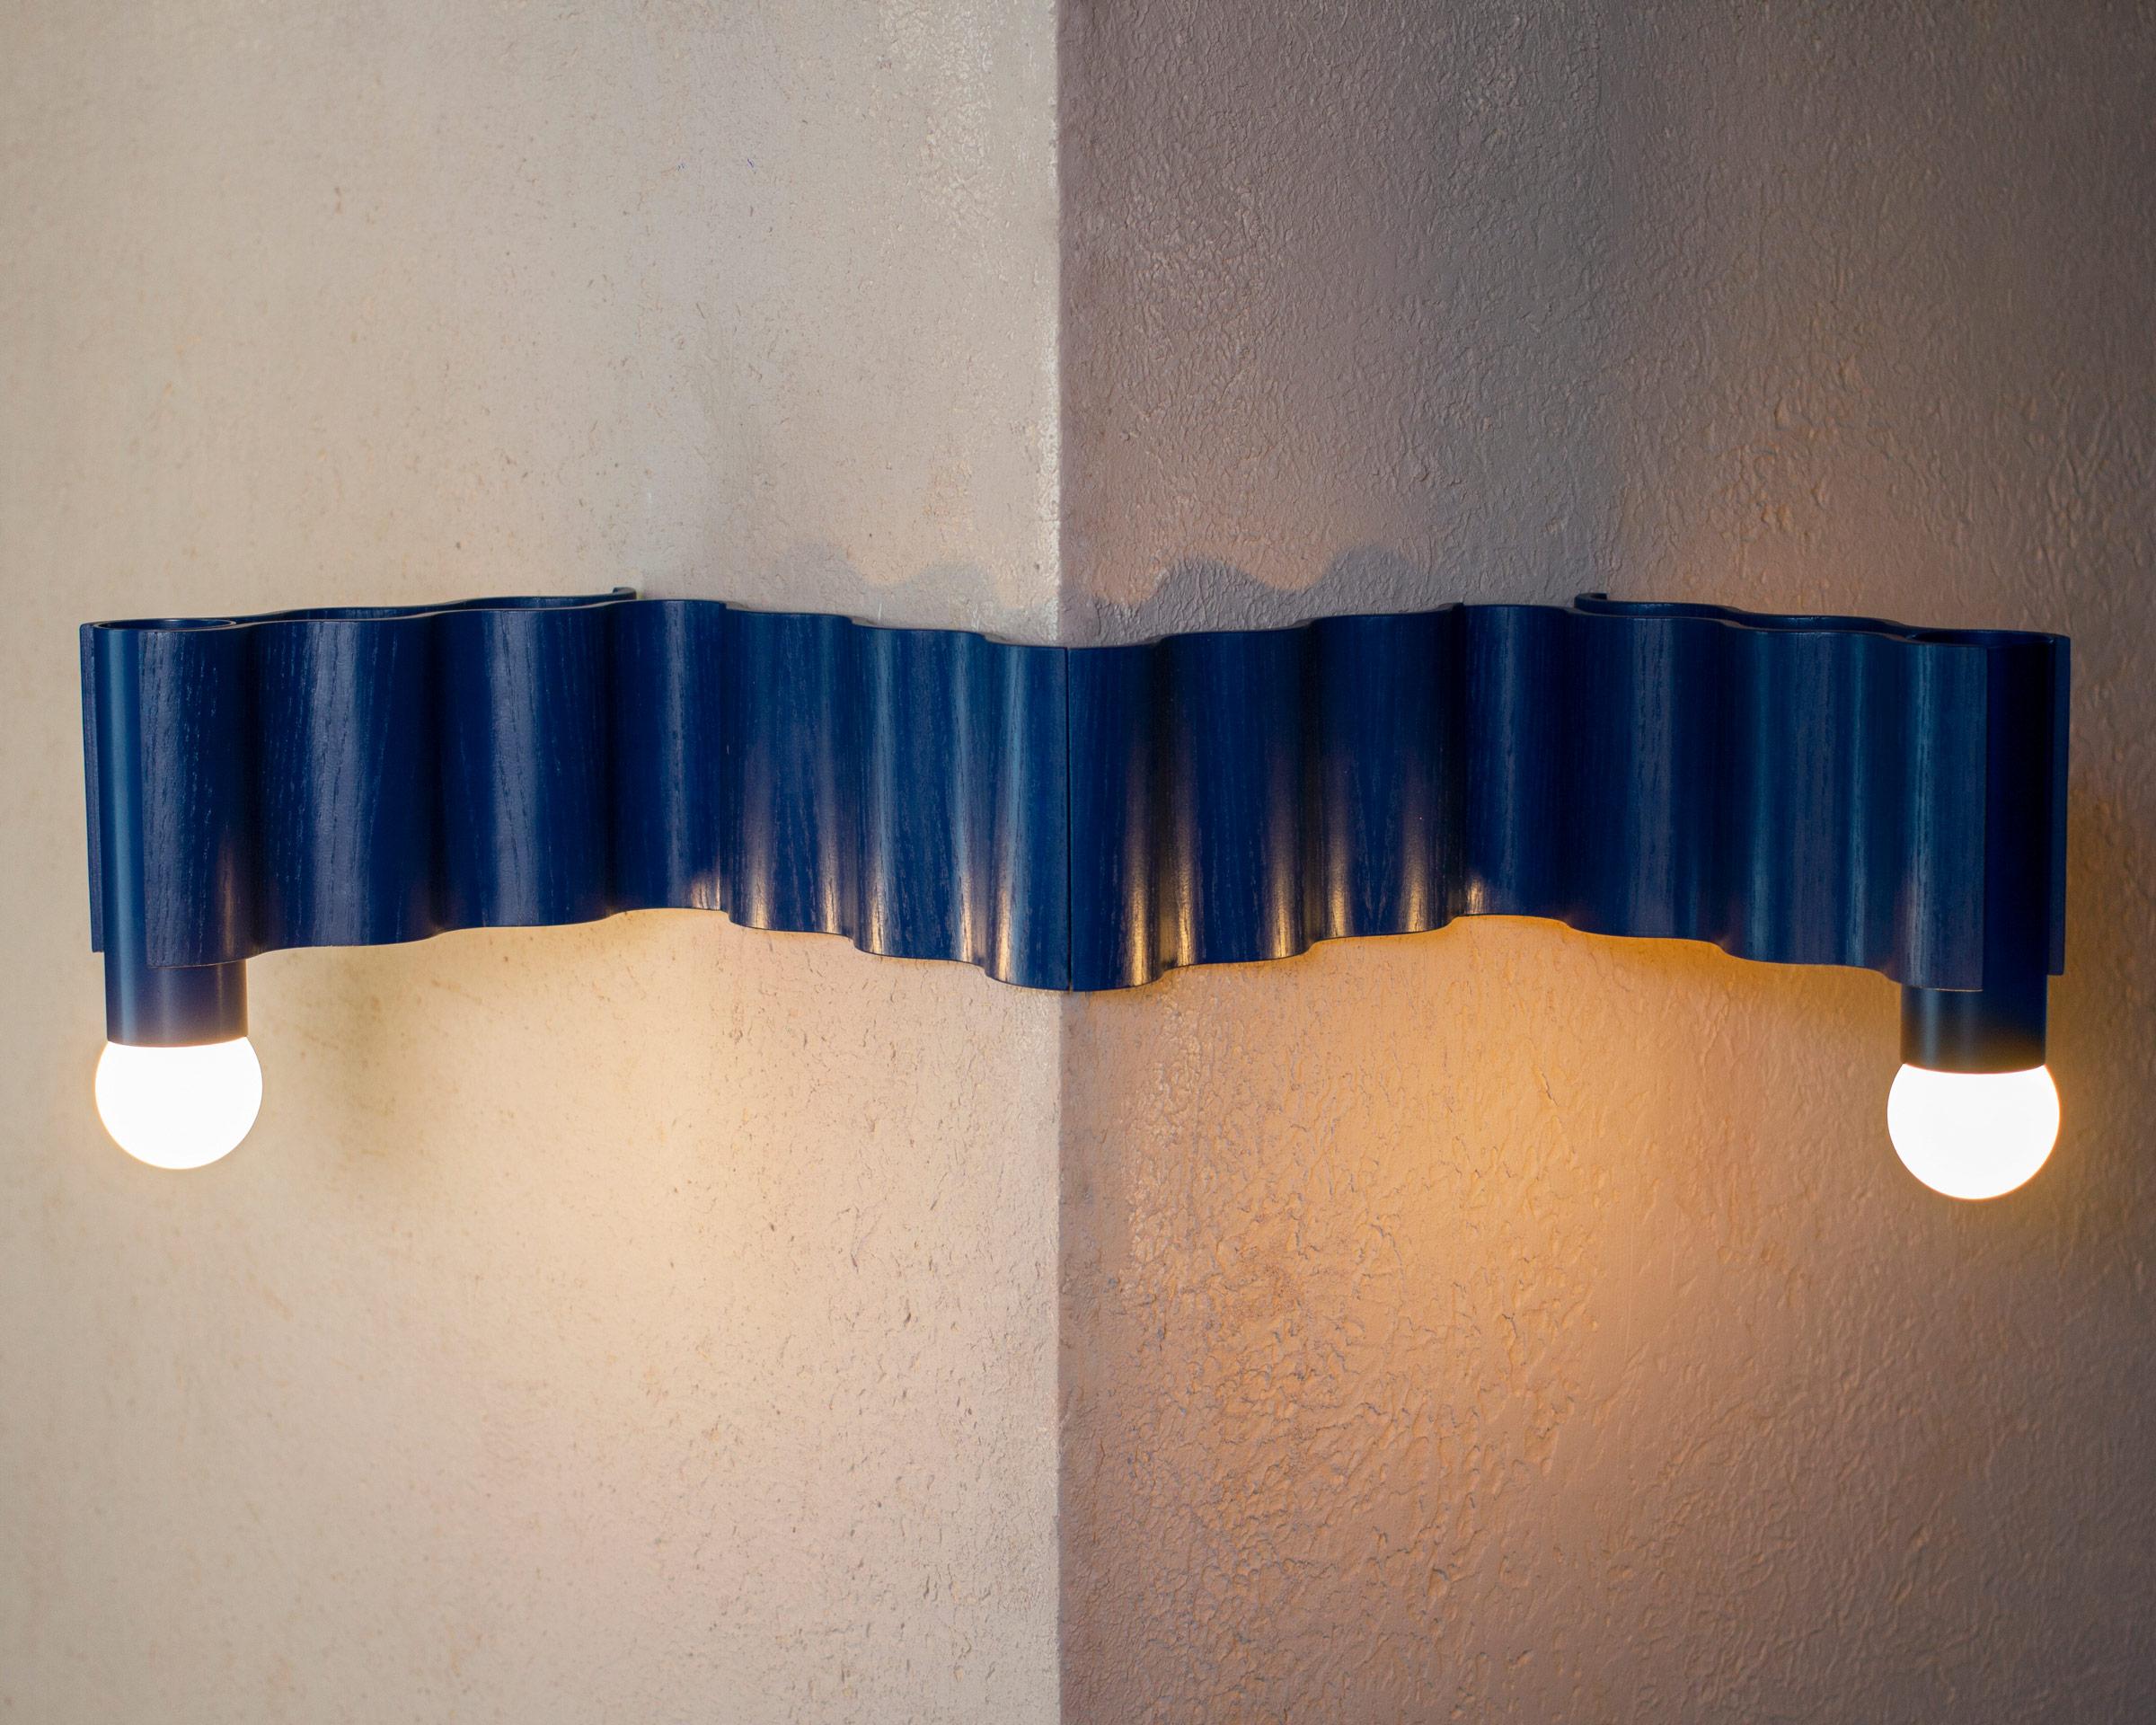 Double Corrugation Sconce / Wall Light in Natural Ash Veneer and Sapphire Blue In New Condition For Sale In London, GB